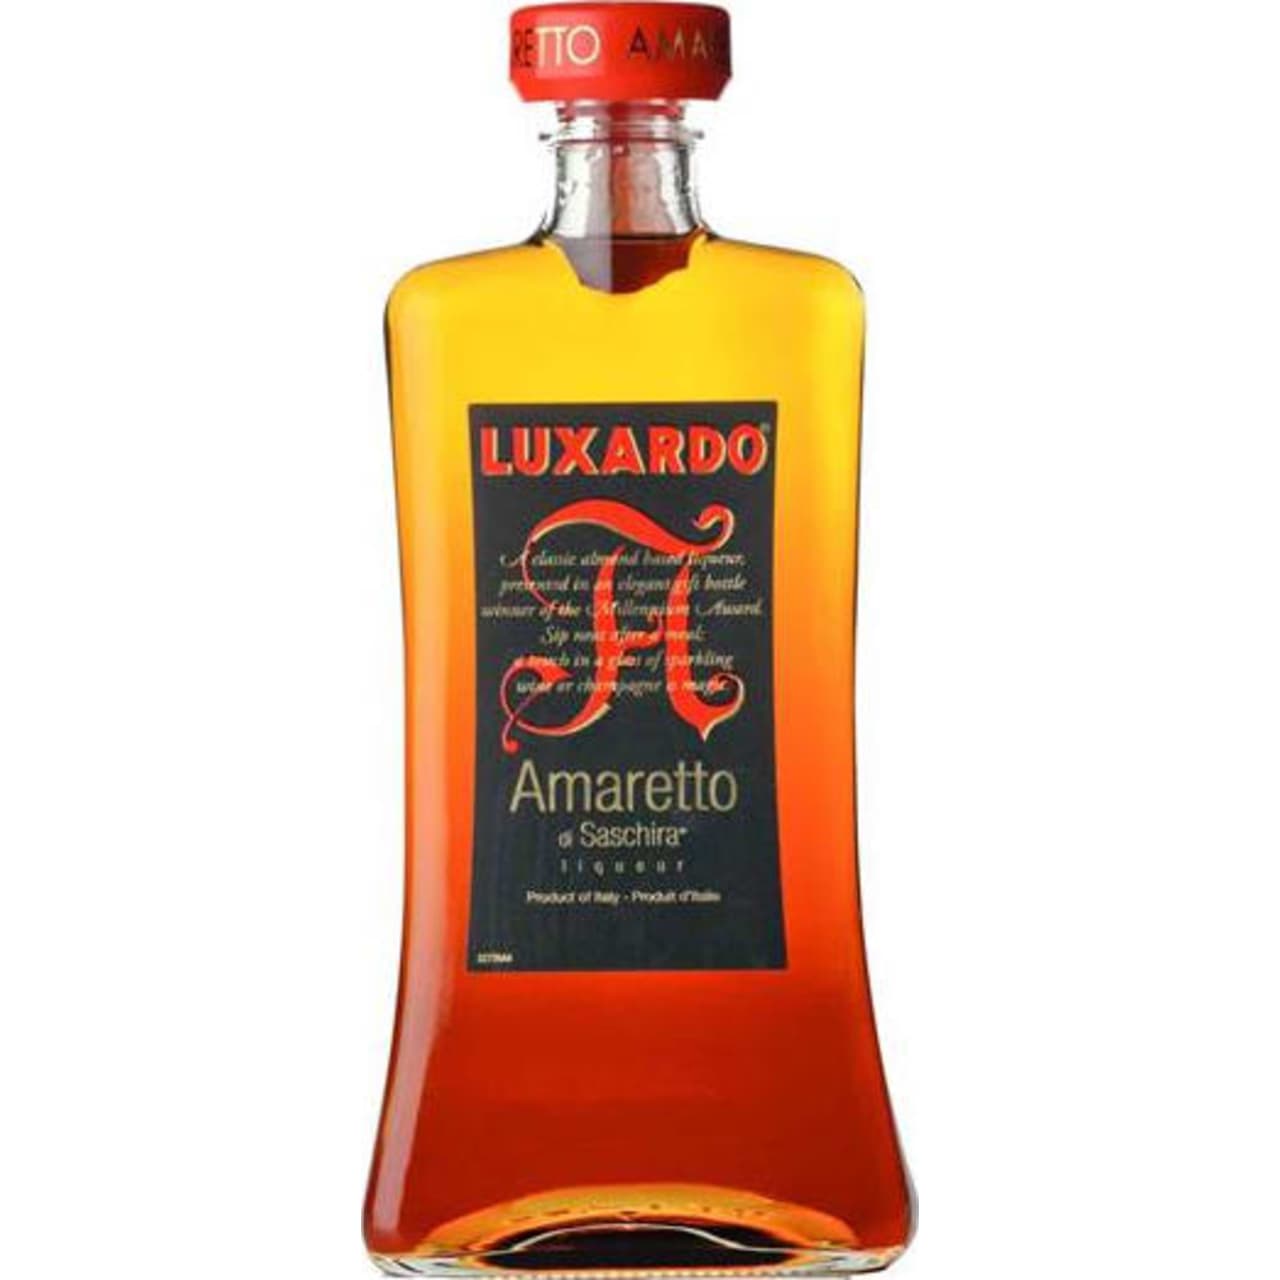 With its hint of vanilla and elegant new bottle, Luxardo Amaretto di Saschira Liqueur is luxurious amaretto, with a drier note and lingering almond flavours.